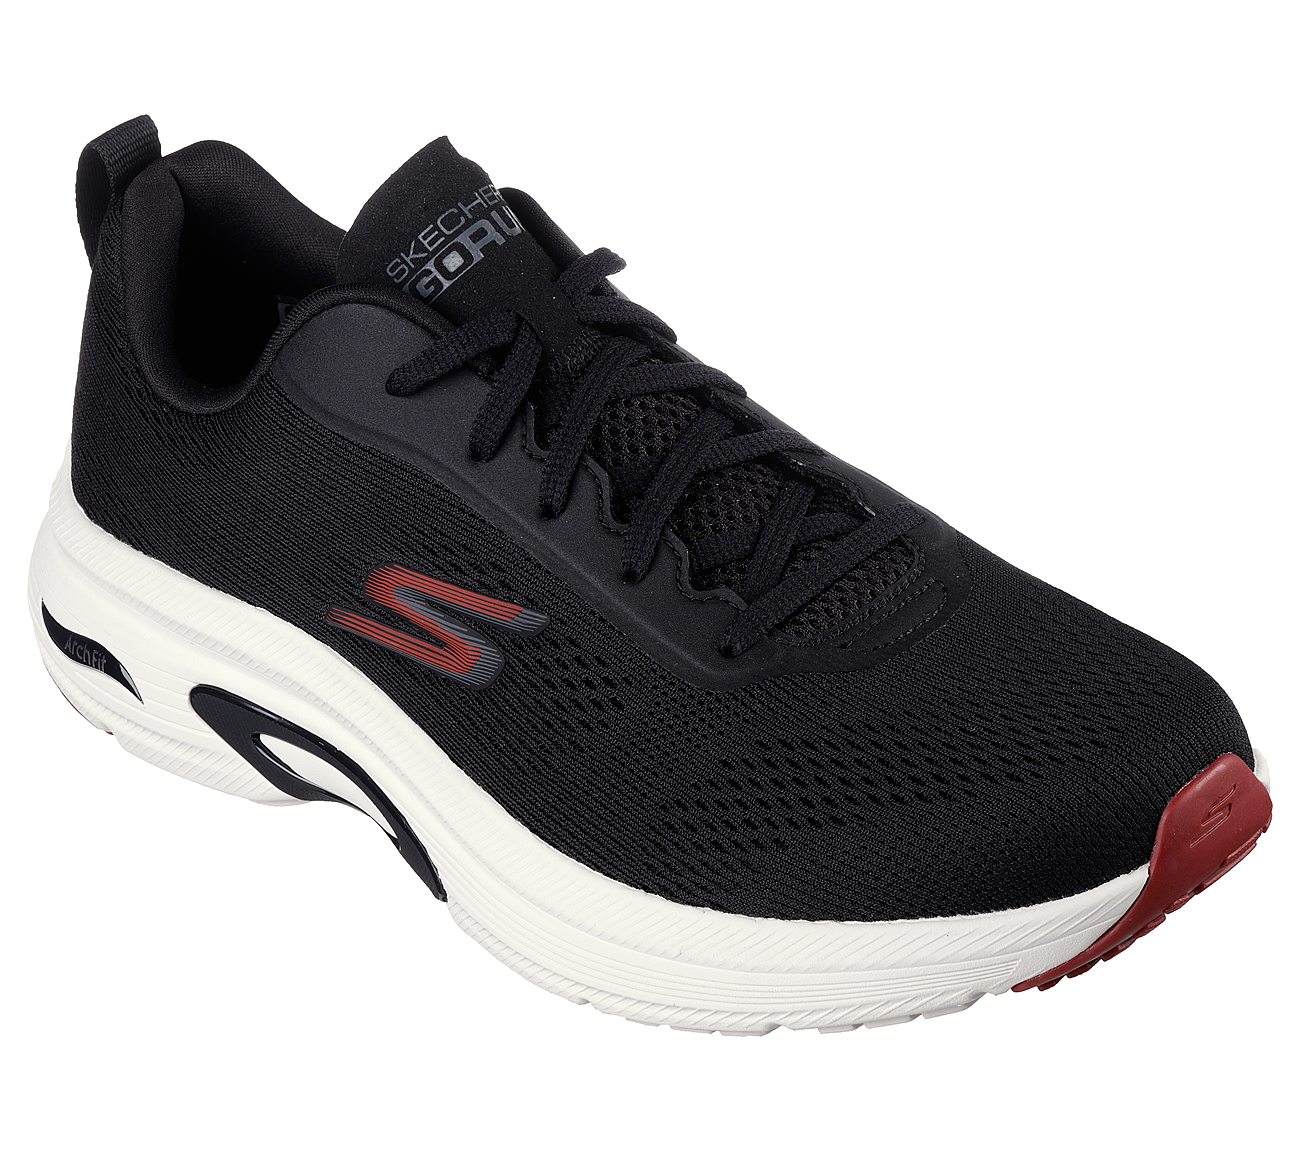 GO RUN ARCH FIT, BLACK/RED Footwear Lateral View